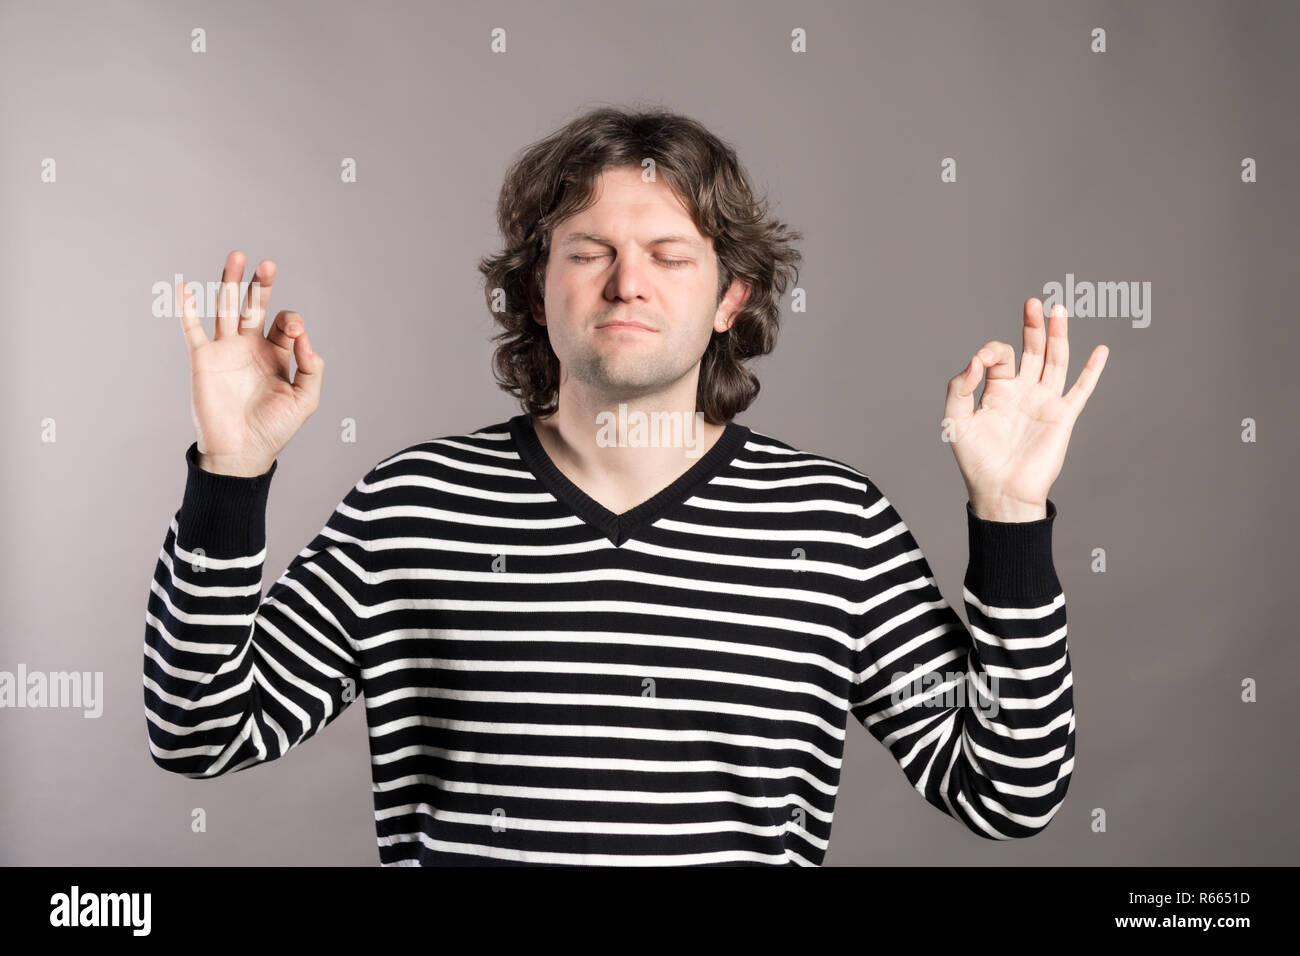 Peaceful young man meditating with his eyes closed and keeping hands in mudra gesture. Handsome guy concentrating. Harmony concept. Isolated front vie Stock Photo